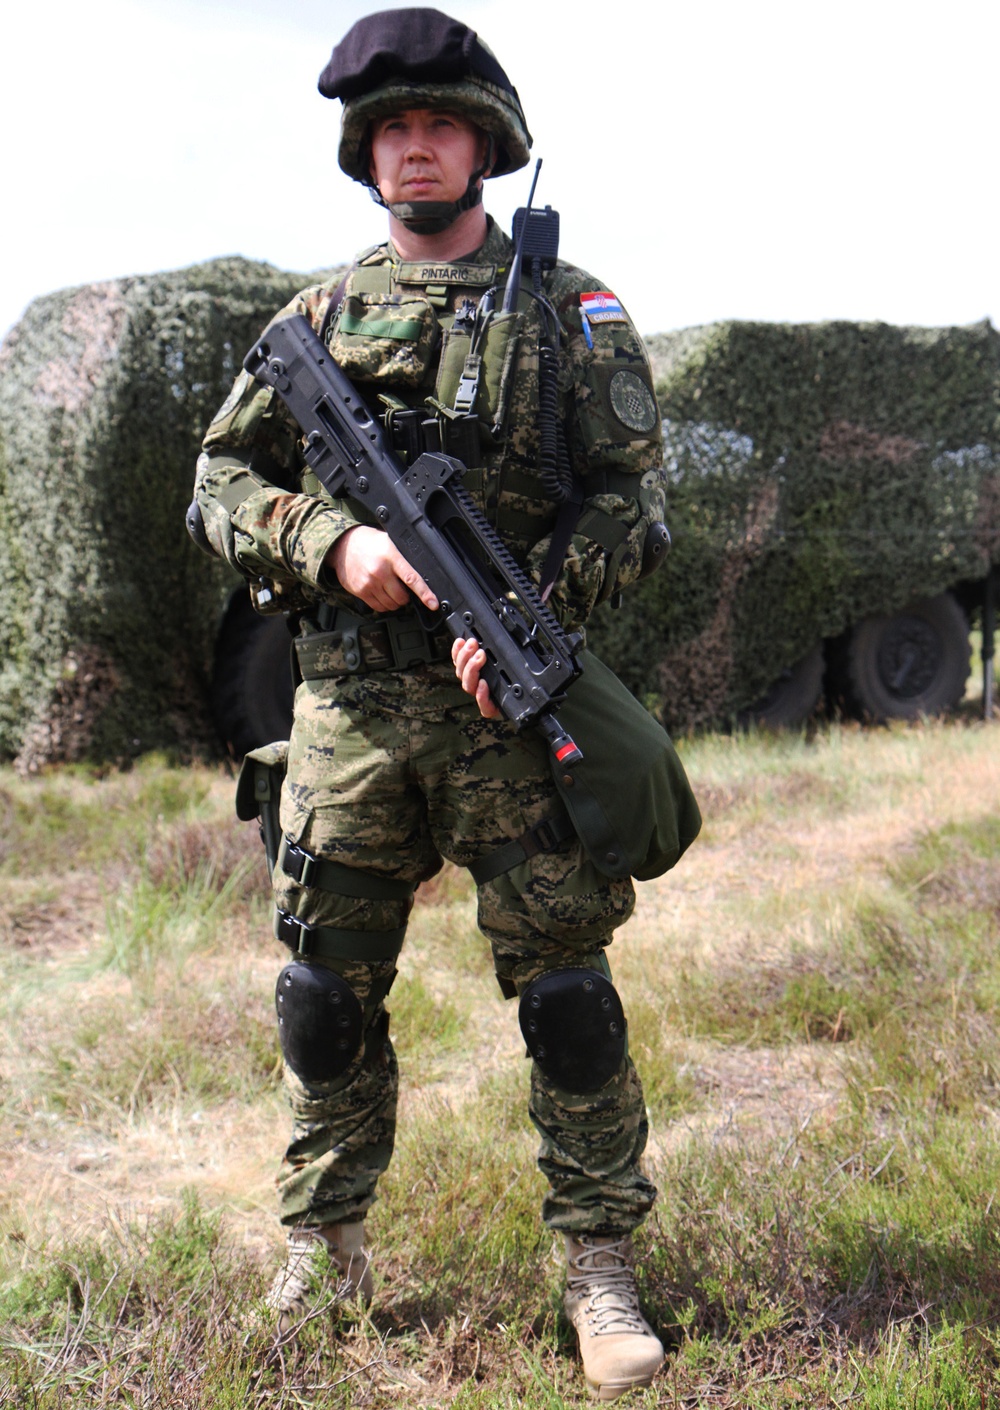 Patience pays off for Croatian army at Saber Strike 18